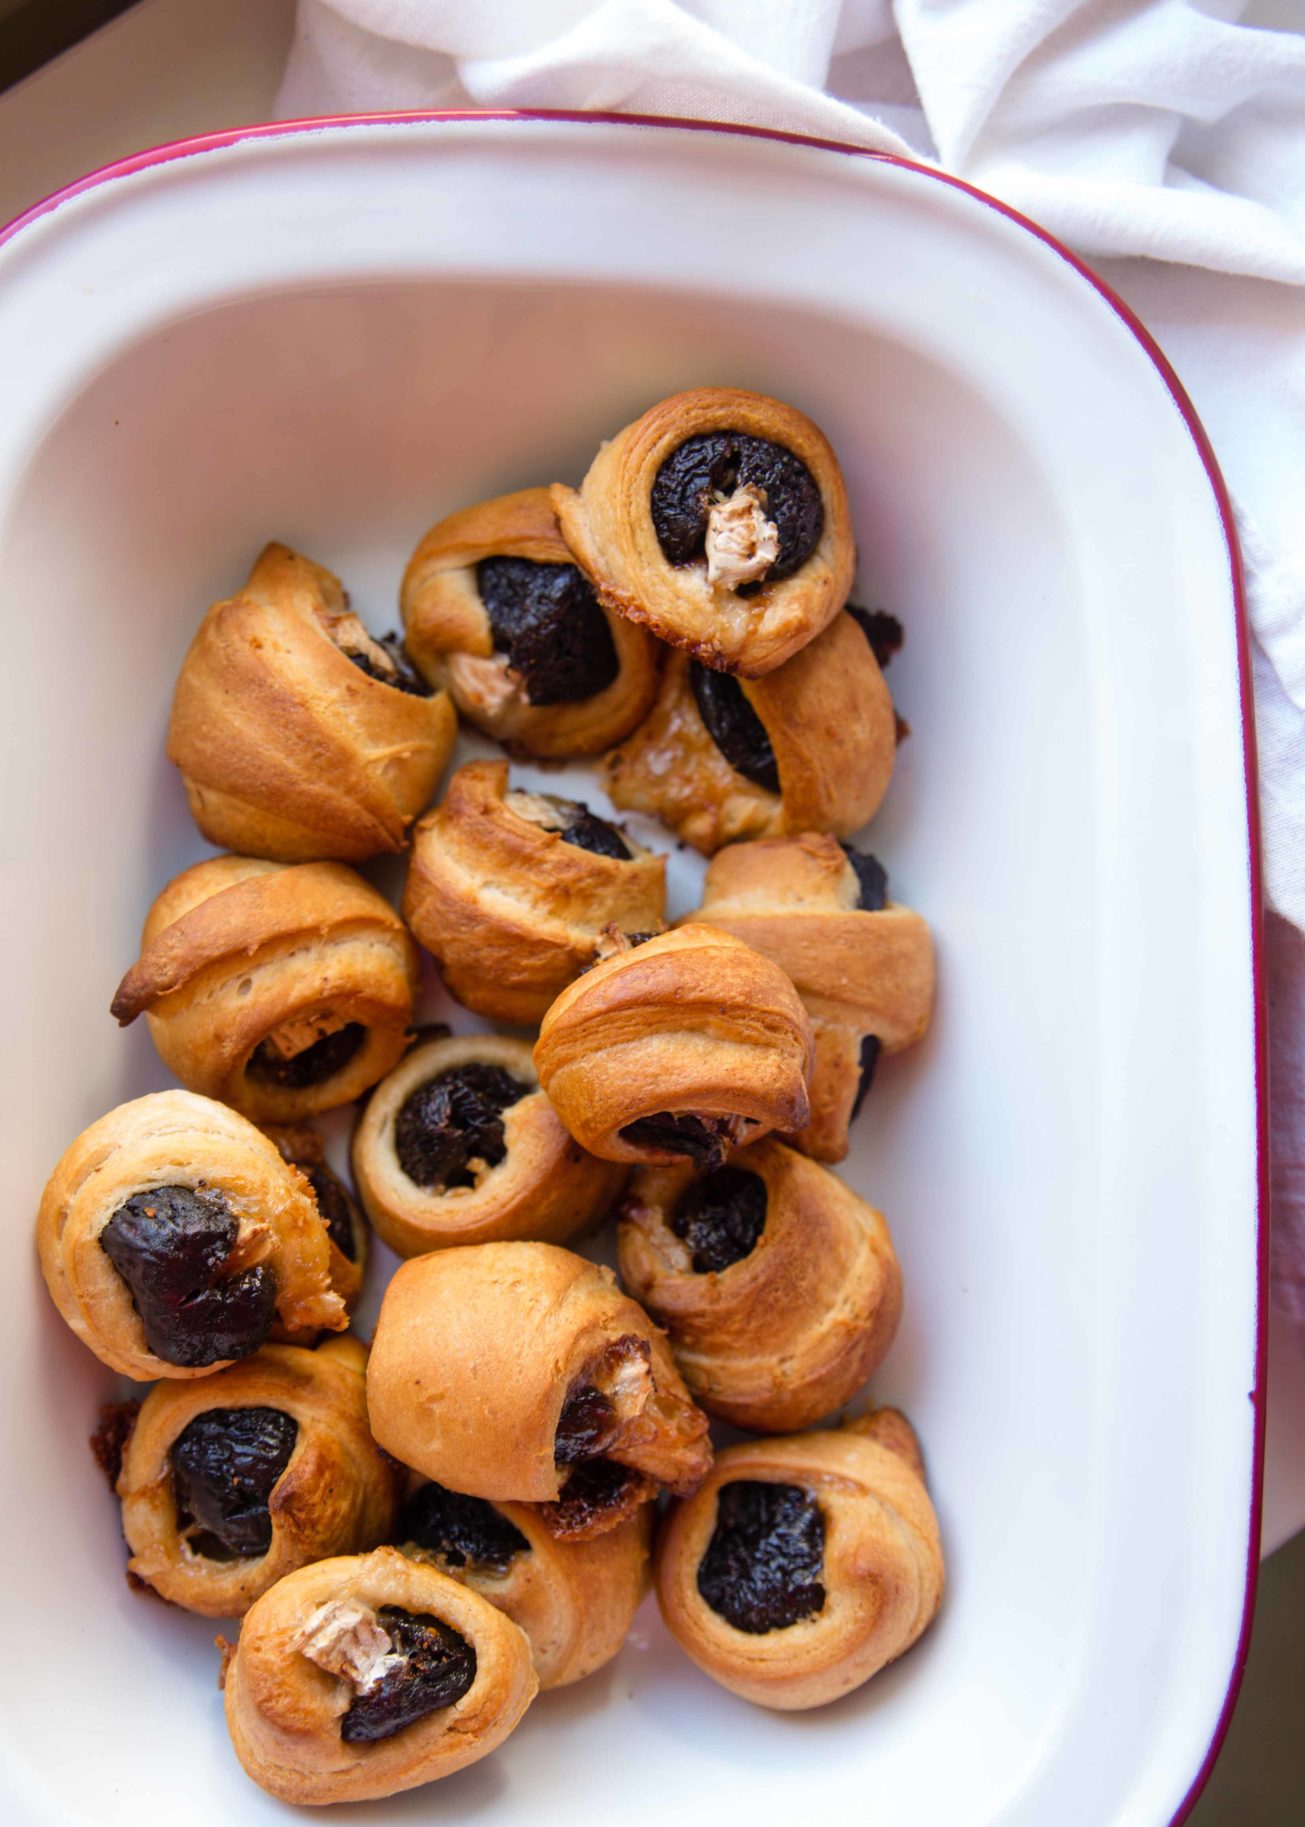 Figs in a Blanket Brie Baked Crescent Rolls